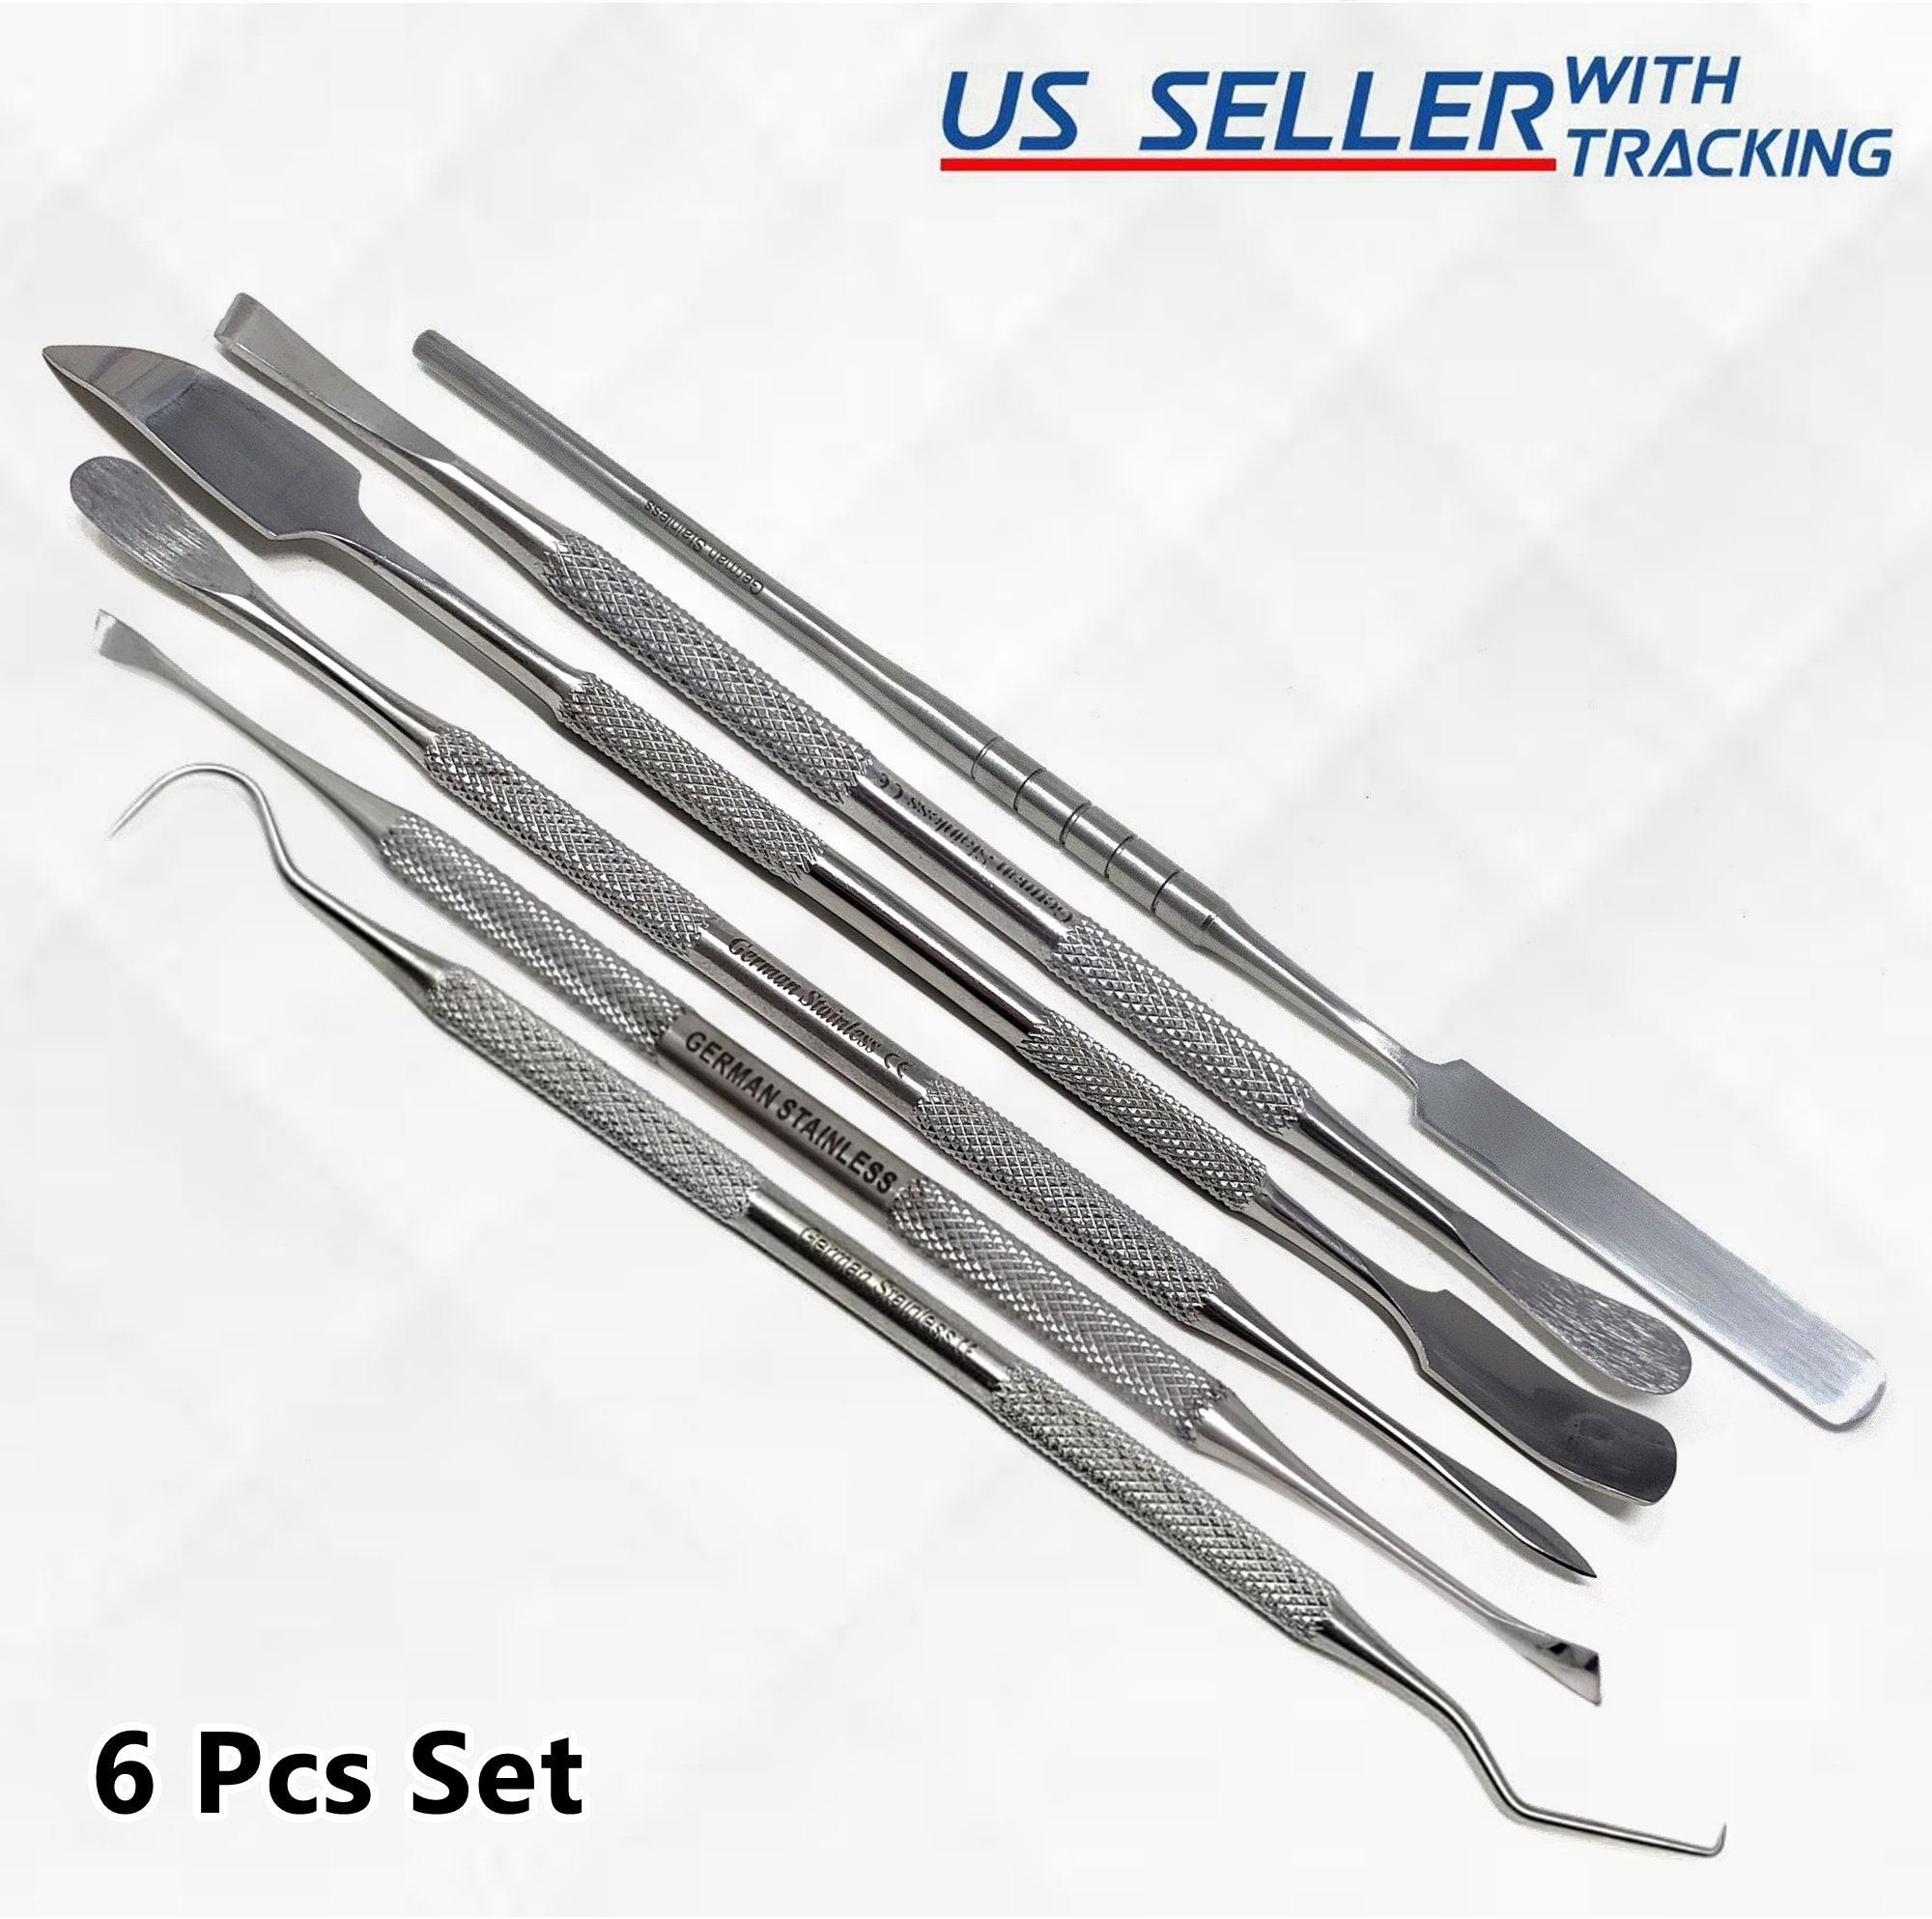 6 Piece Stainless Steel Wax Carving Tool Set PLUS Storage Pouch Ideal for  Sculpture Work With Clay Ceramics Wax and Other Soft Materials 